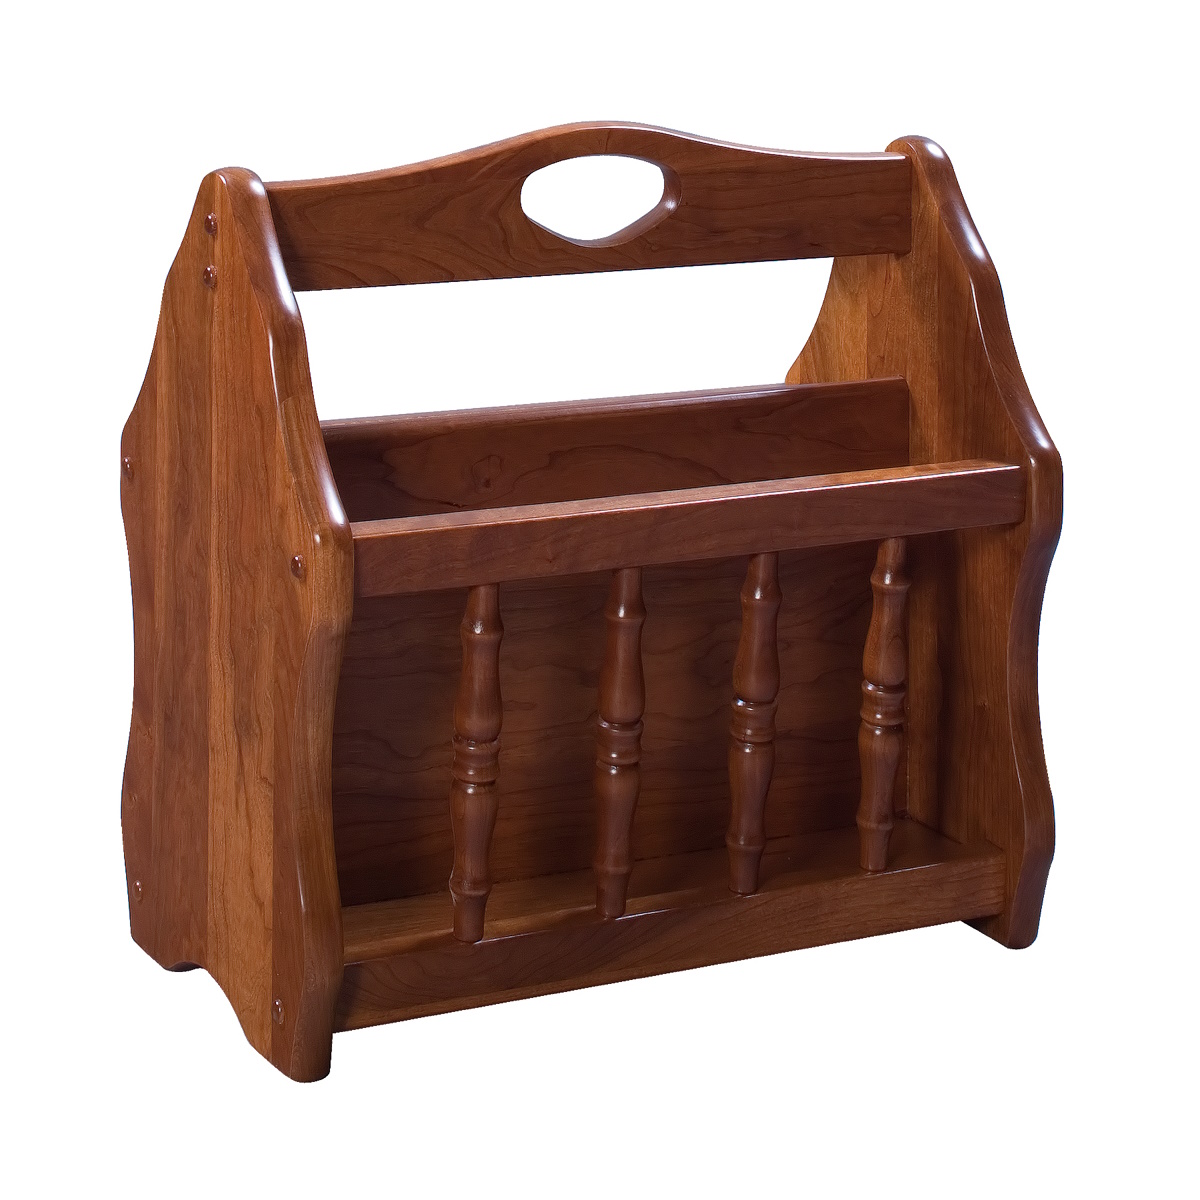 Shop Magazine Rack | Handcrafted Amish Furniture from Country Lane ...